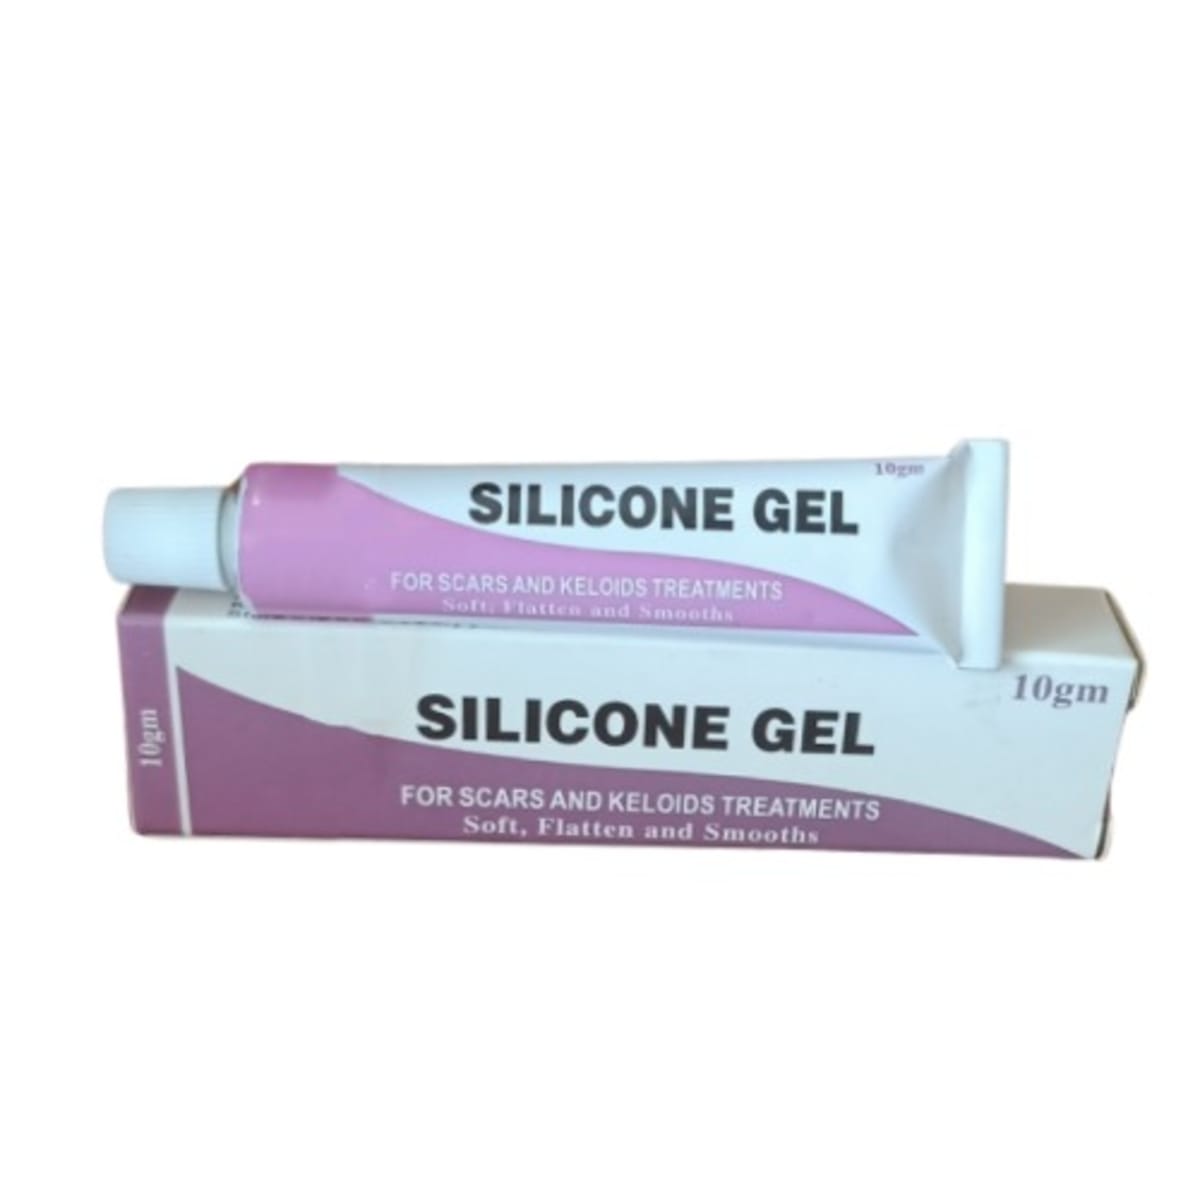 Silicone Gel For Skin Treatment - 10g